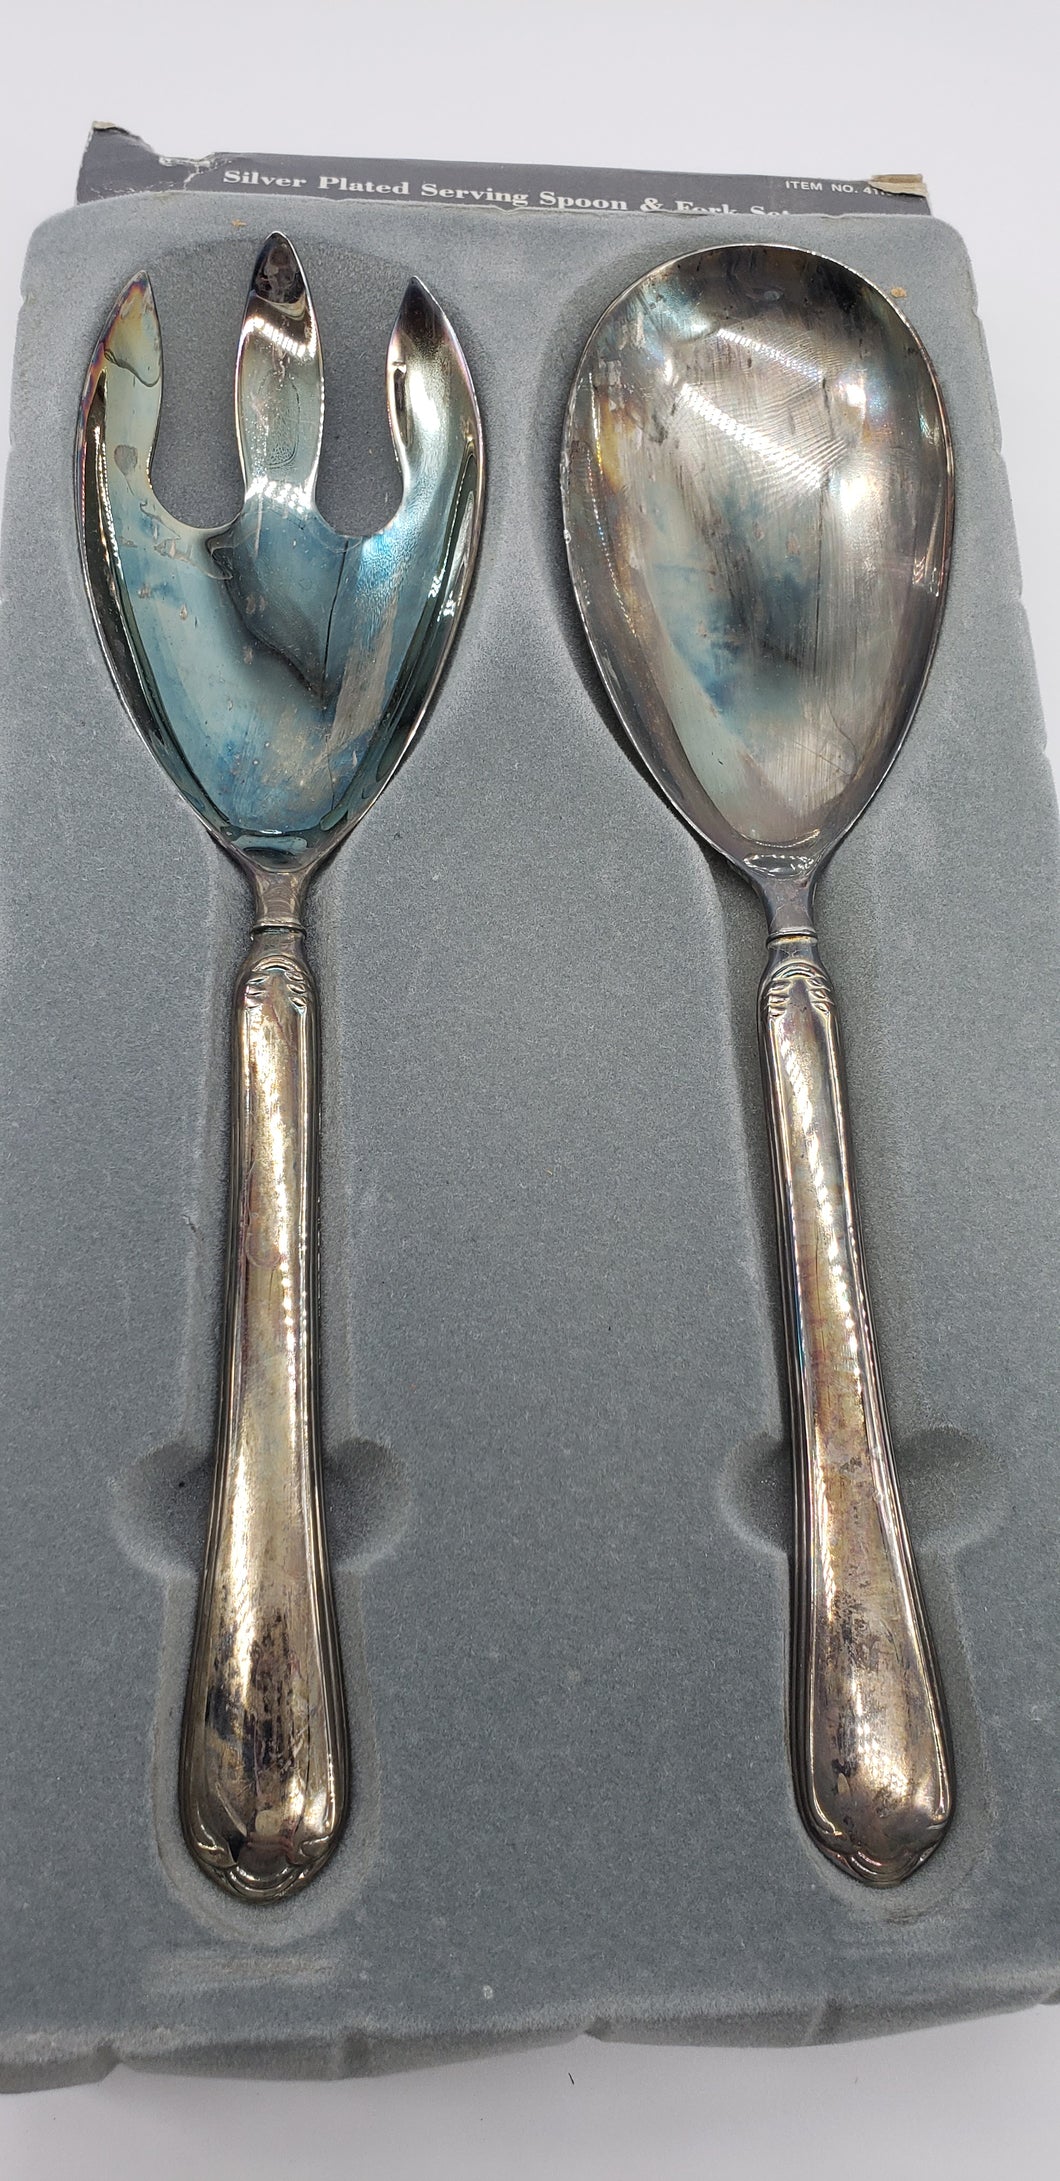 Regal Silver Plated Serving Fork Spoon Pasta Utensil Set of 2 Brand